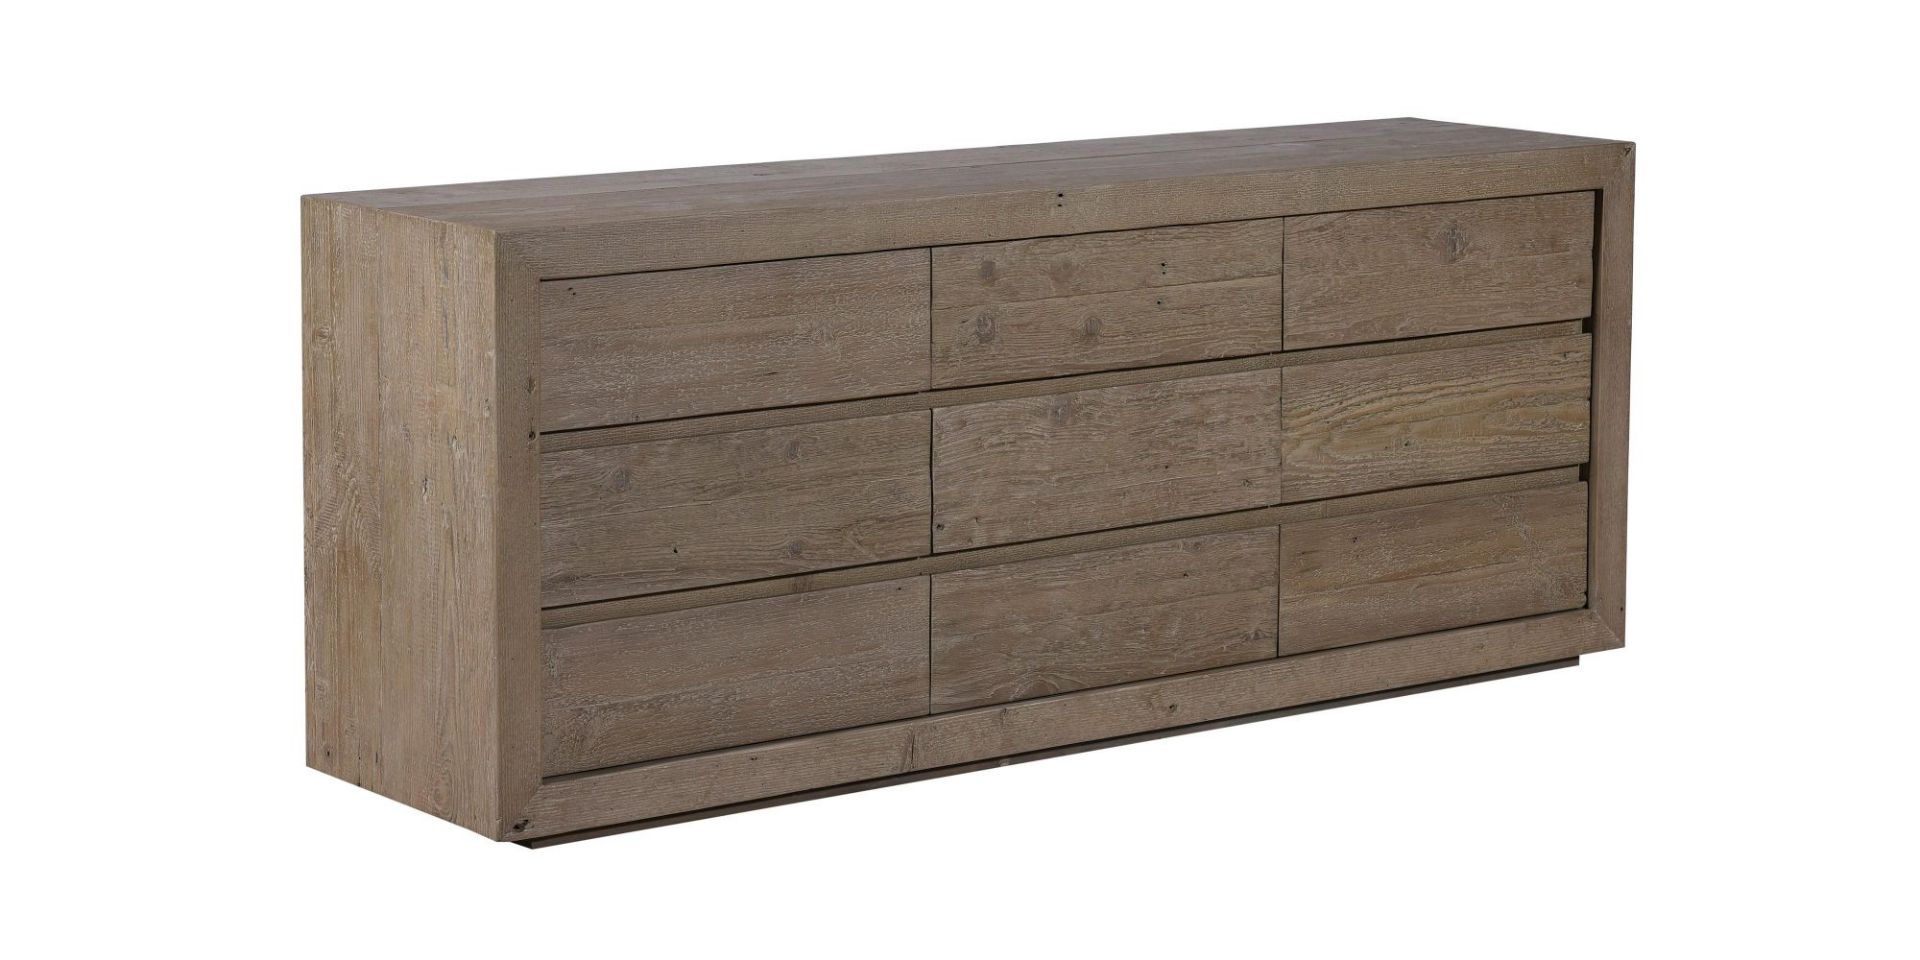 Quad Sideboard Finished In Worn Board With Nine Drawers Made From Reclaimed Floorboards Bringing